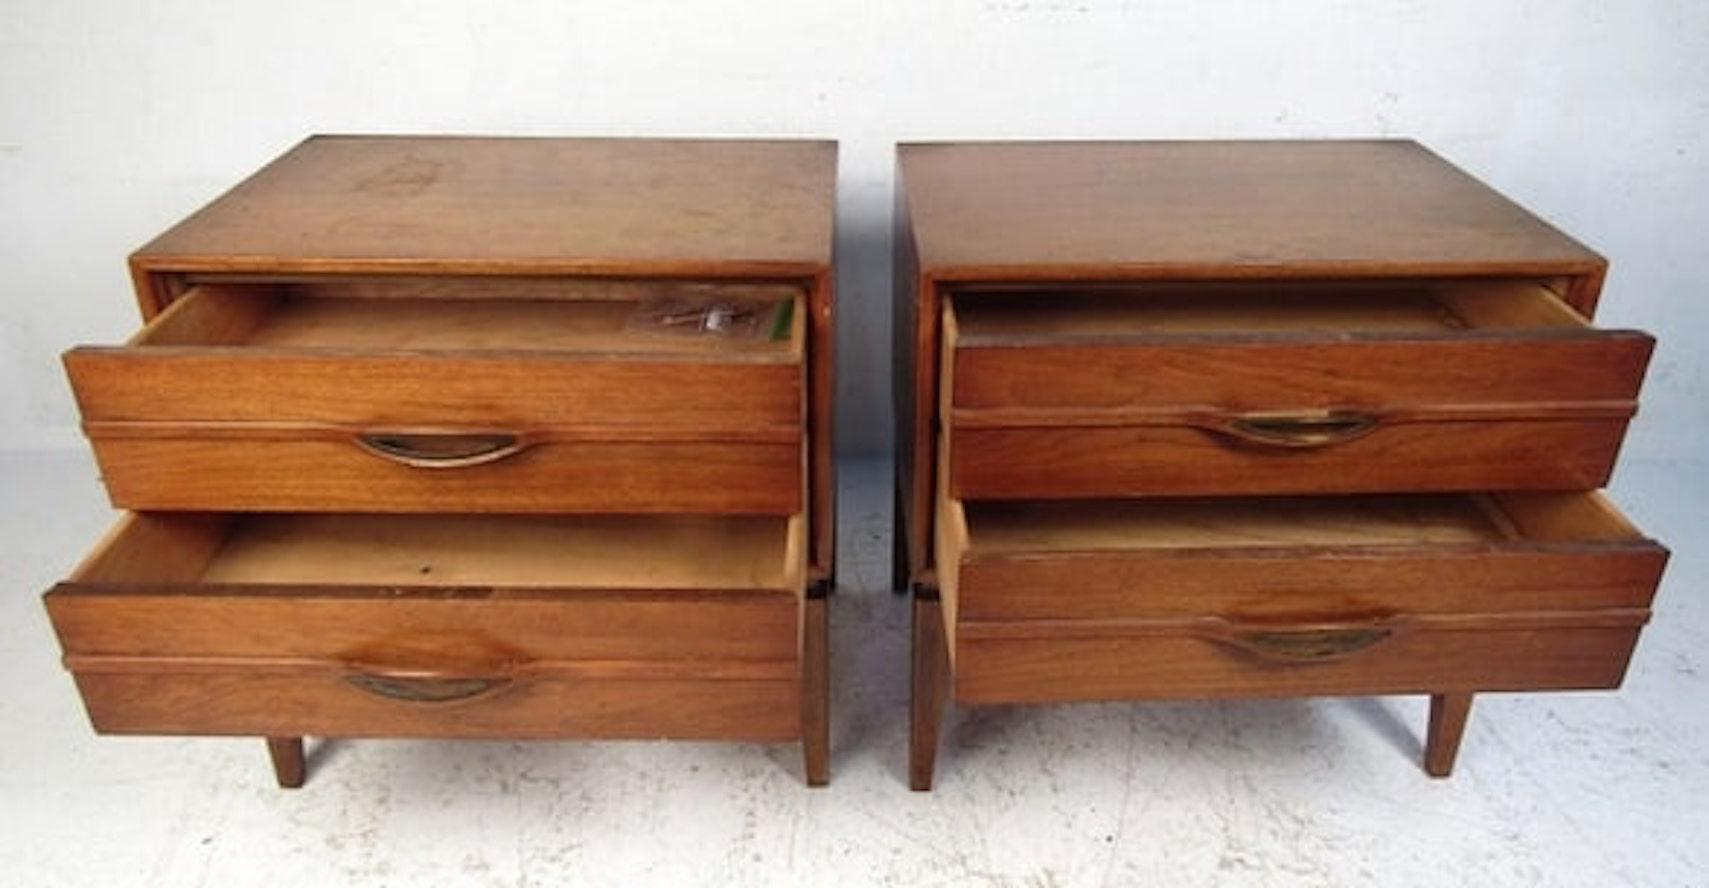 Mid-Century Modern walnut nightstands with sculpted wood handles. Two drawers with brass trim handles.
Please confirm location NY of NJ.